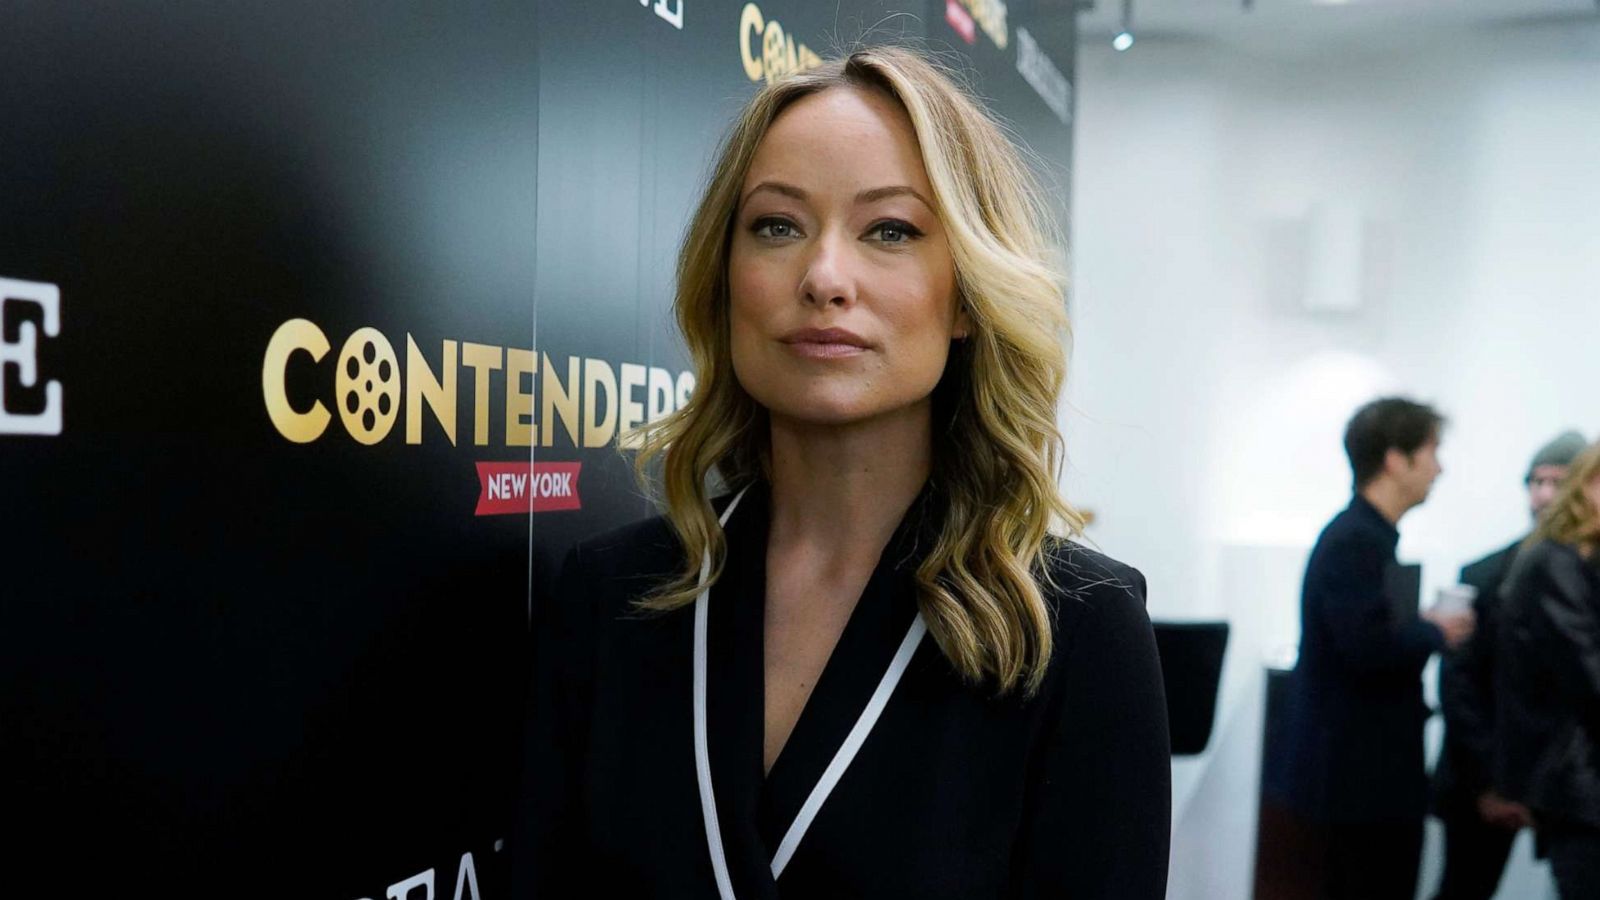 Olivia Wilde says she's envious male colleagues get gentler press